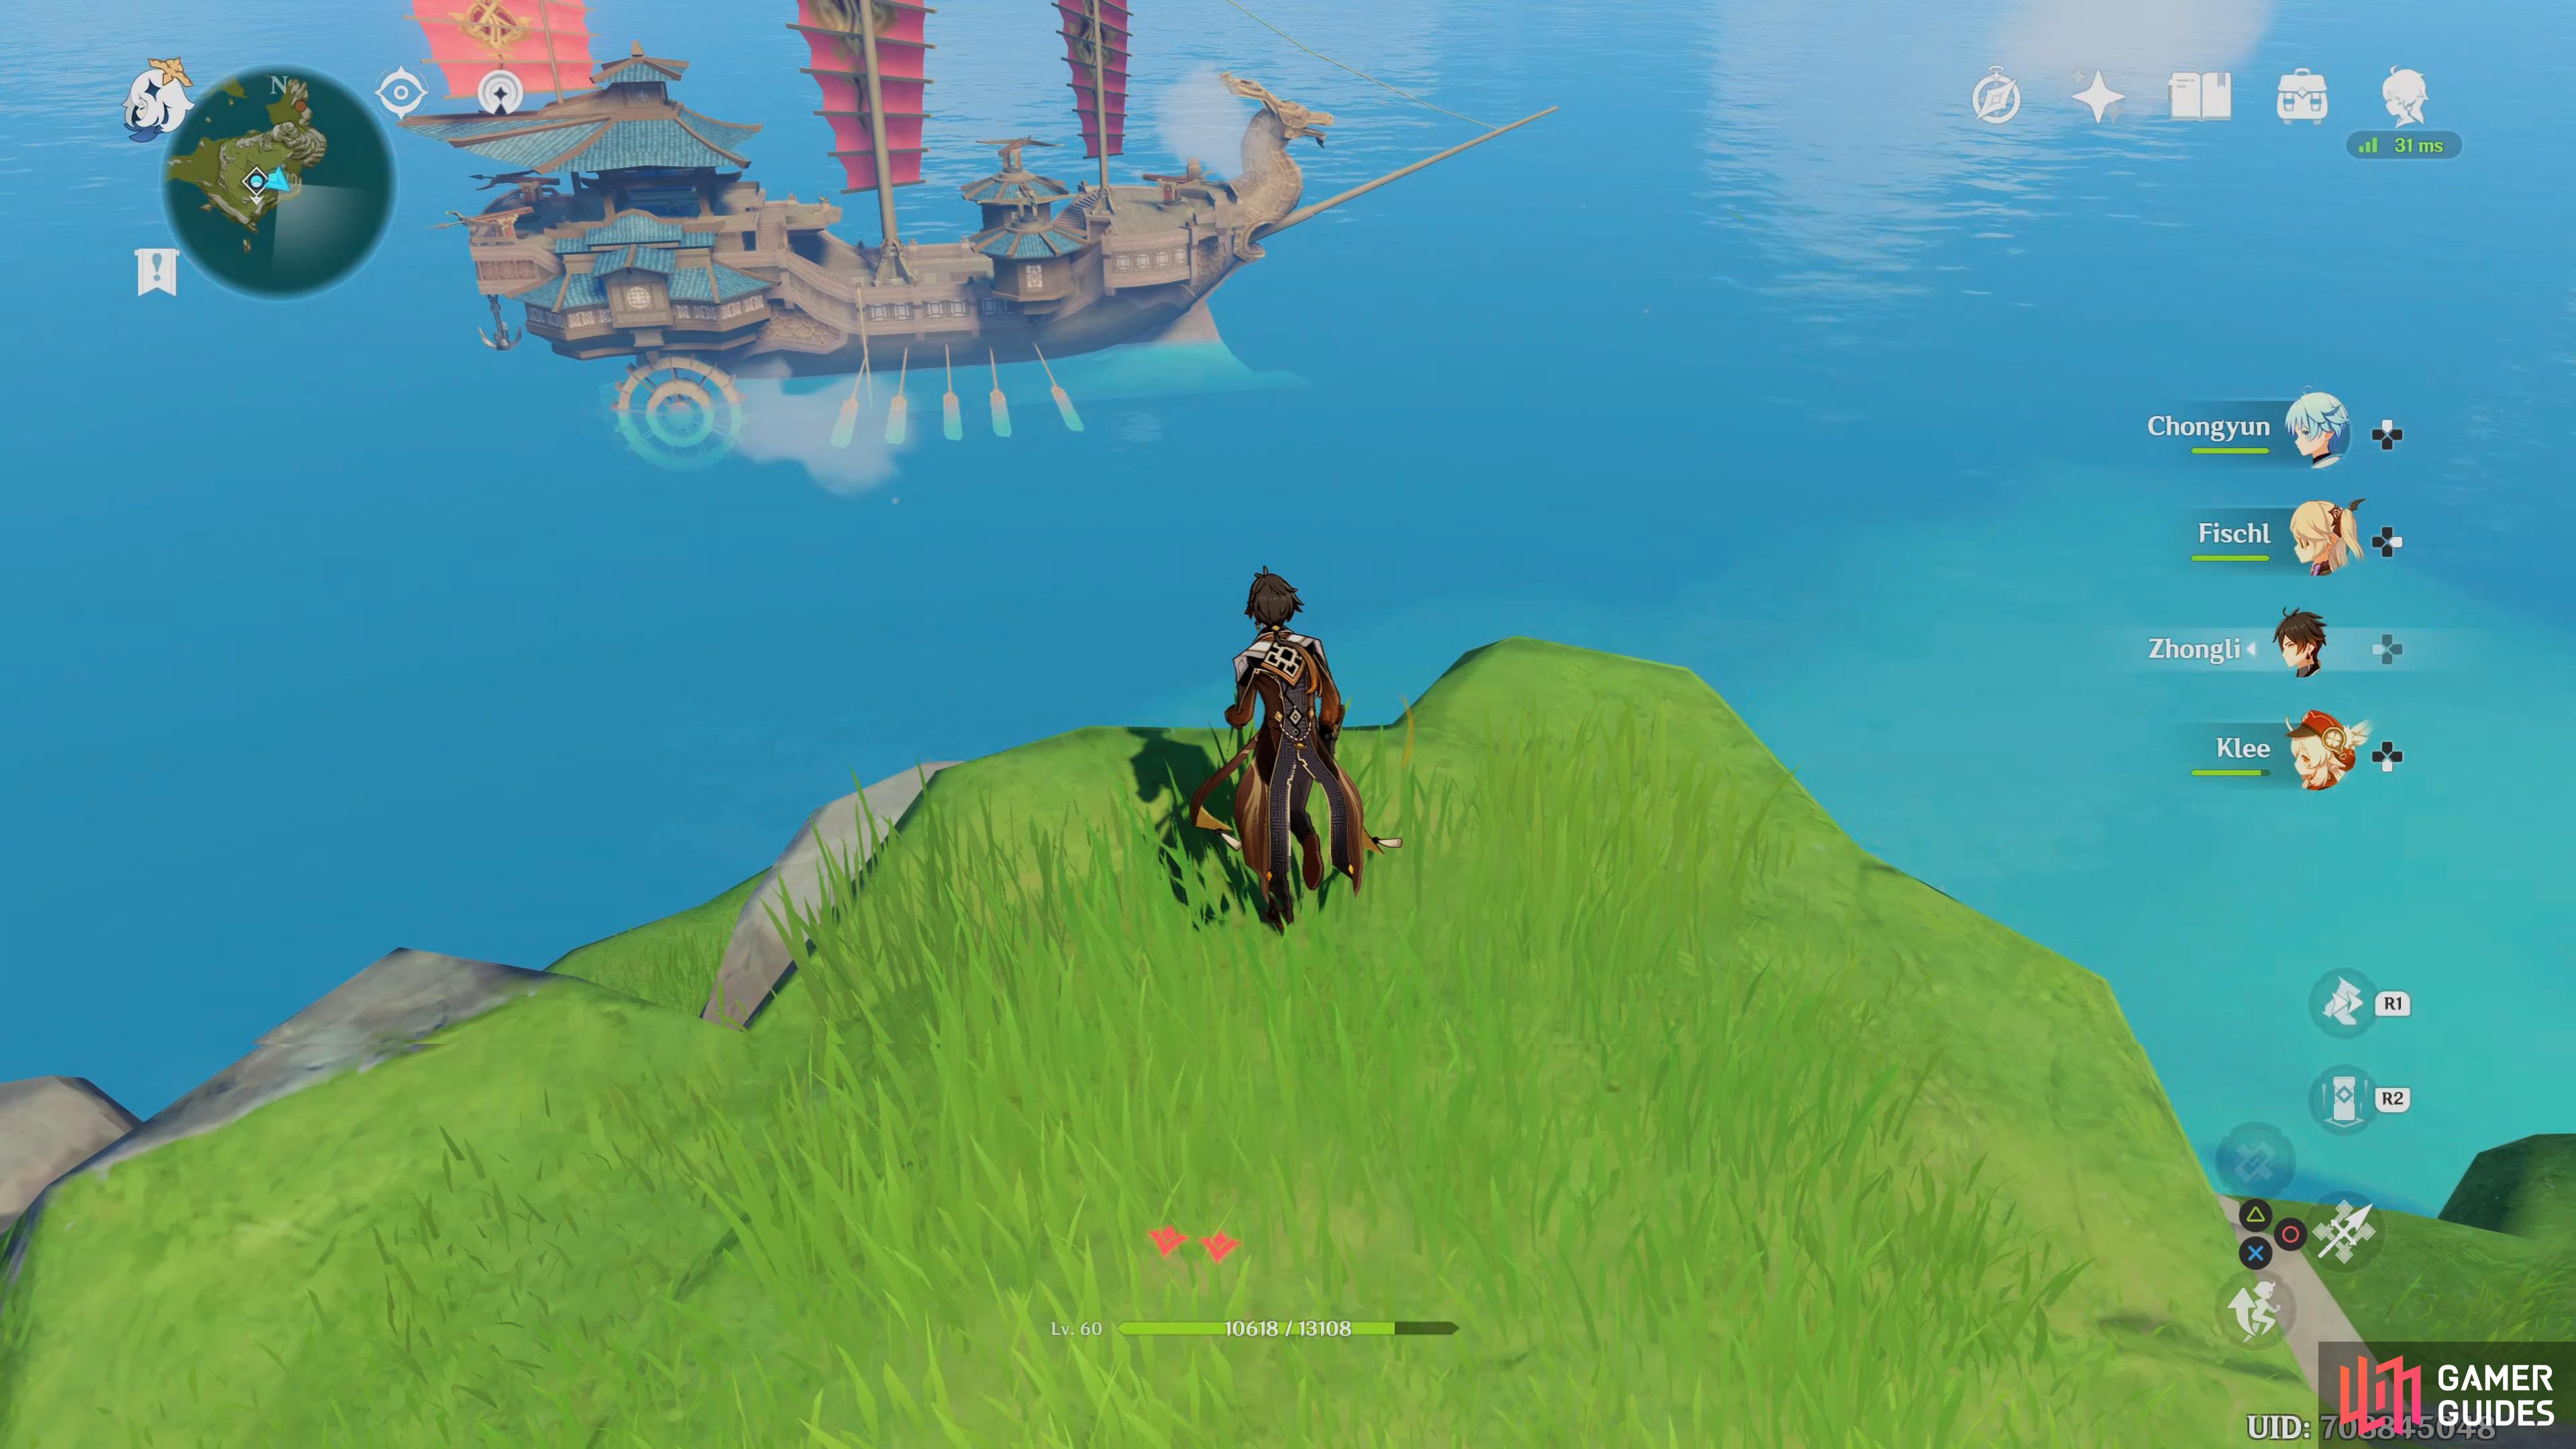 to the east of that domain are some cliffs you can climb and jump from to glide over to the ship.